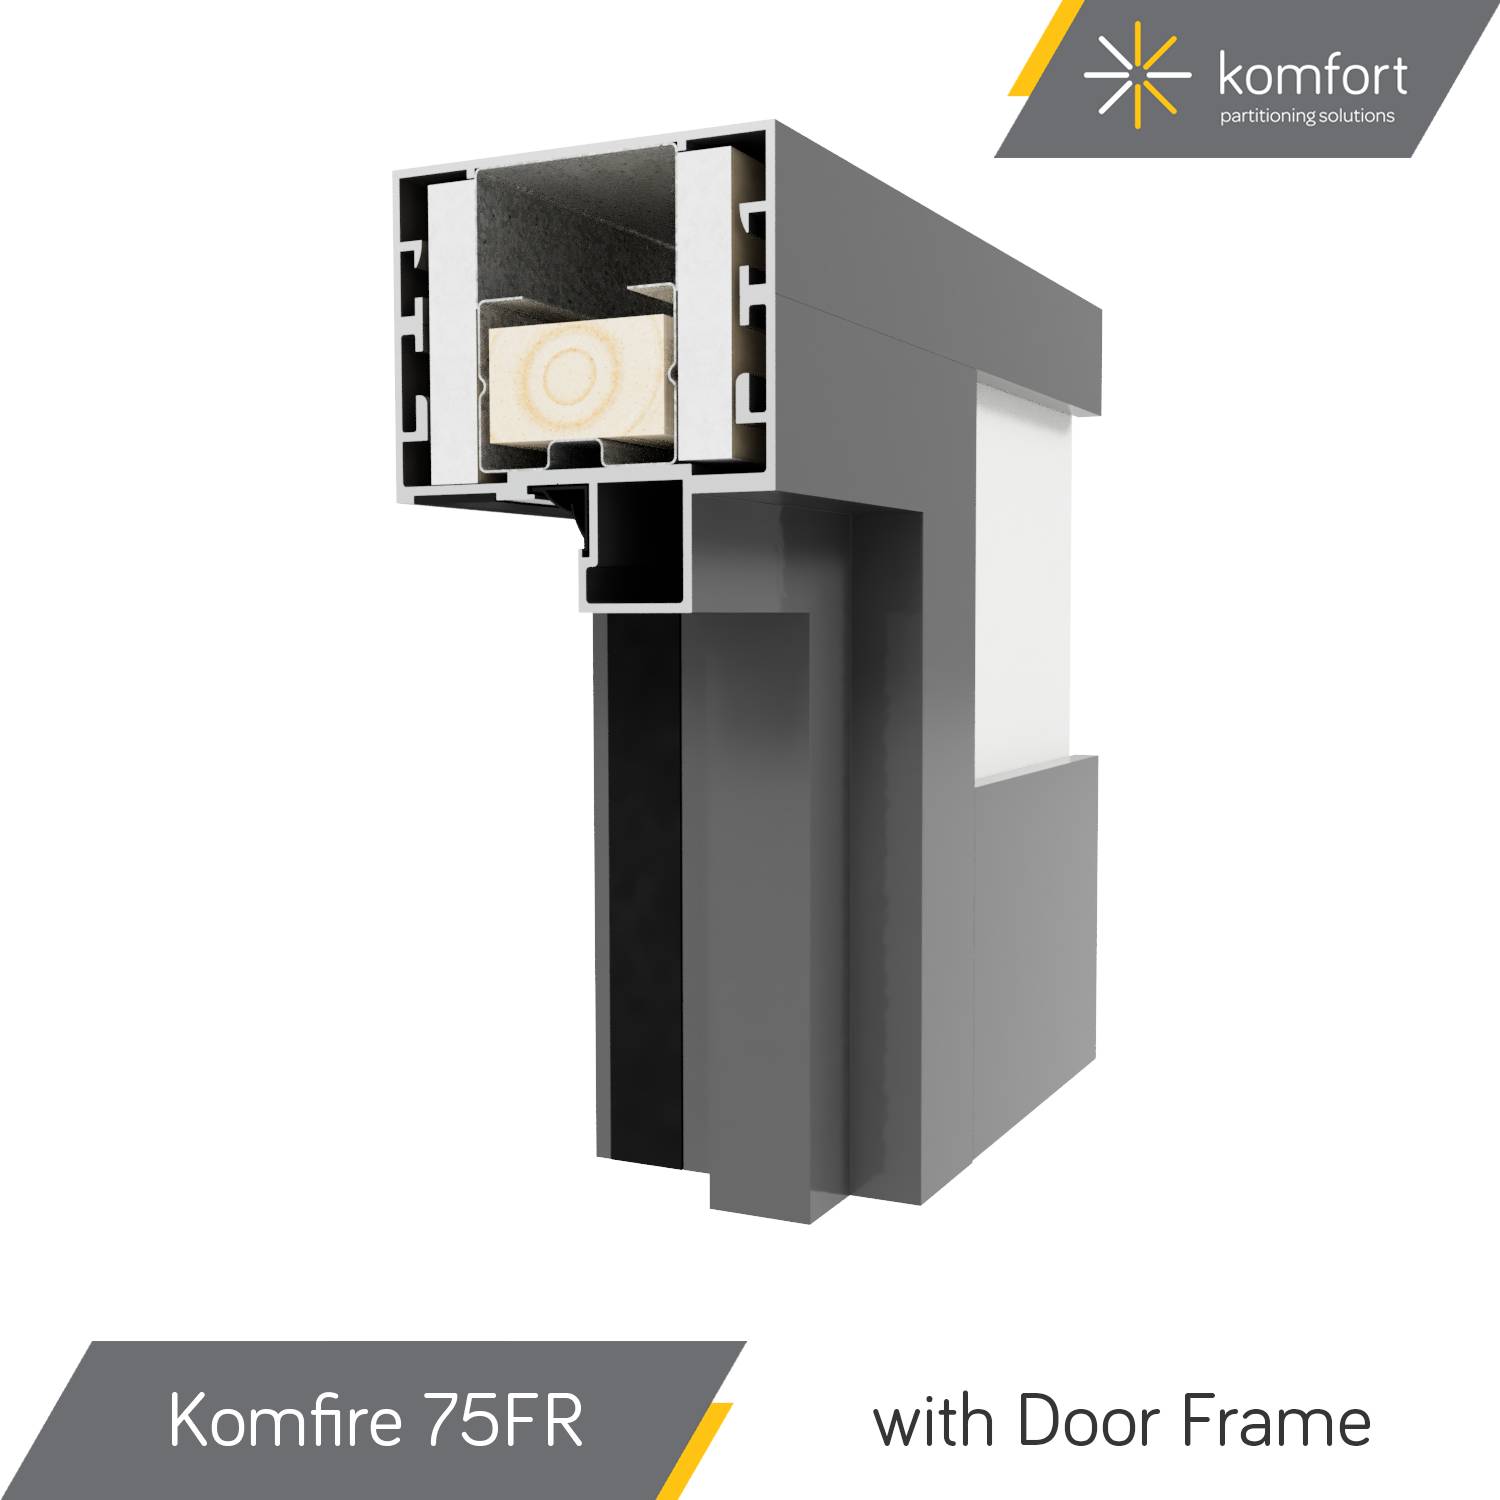 Komfort | Komfire 75FR | 30/0 Fire Rated Solid & Glazed Partitioning